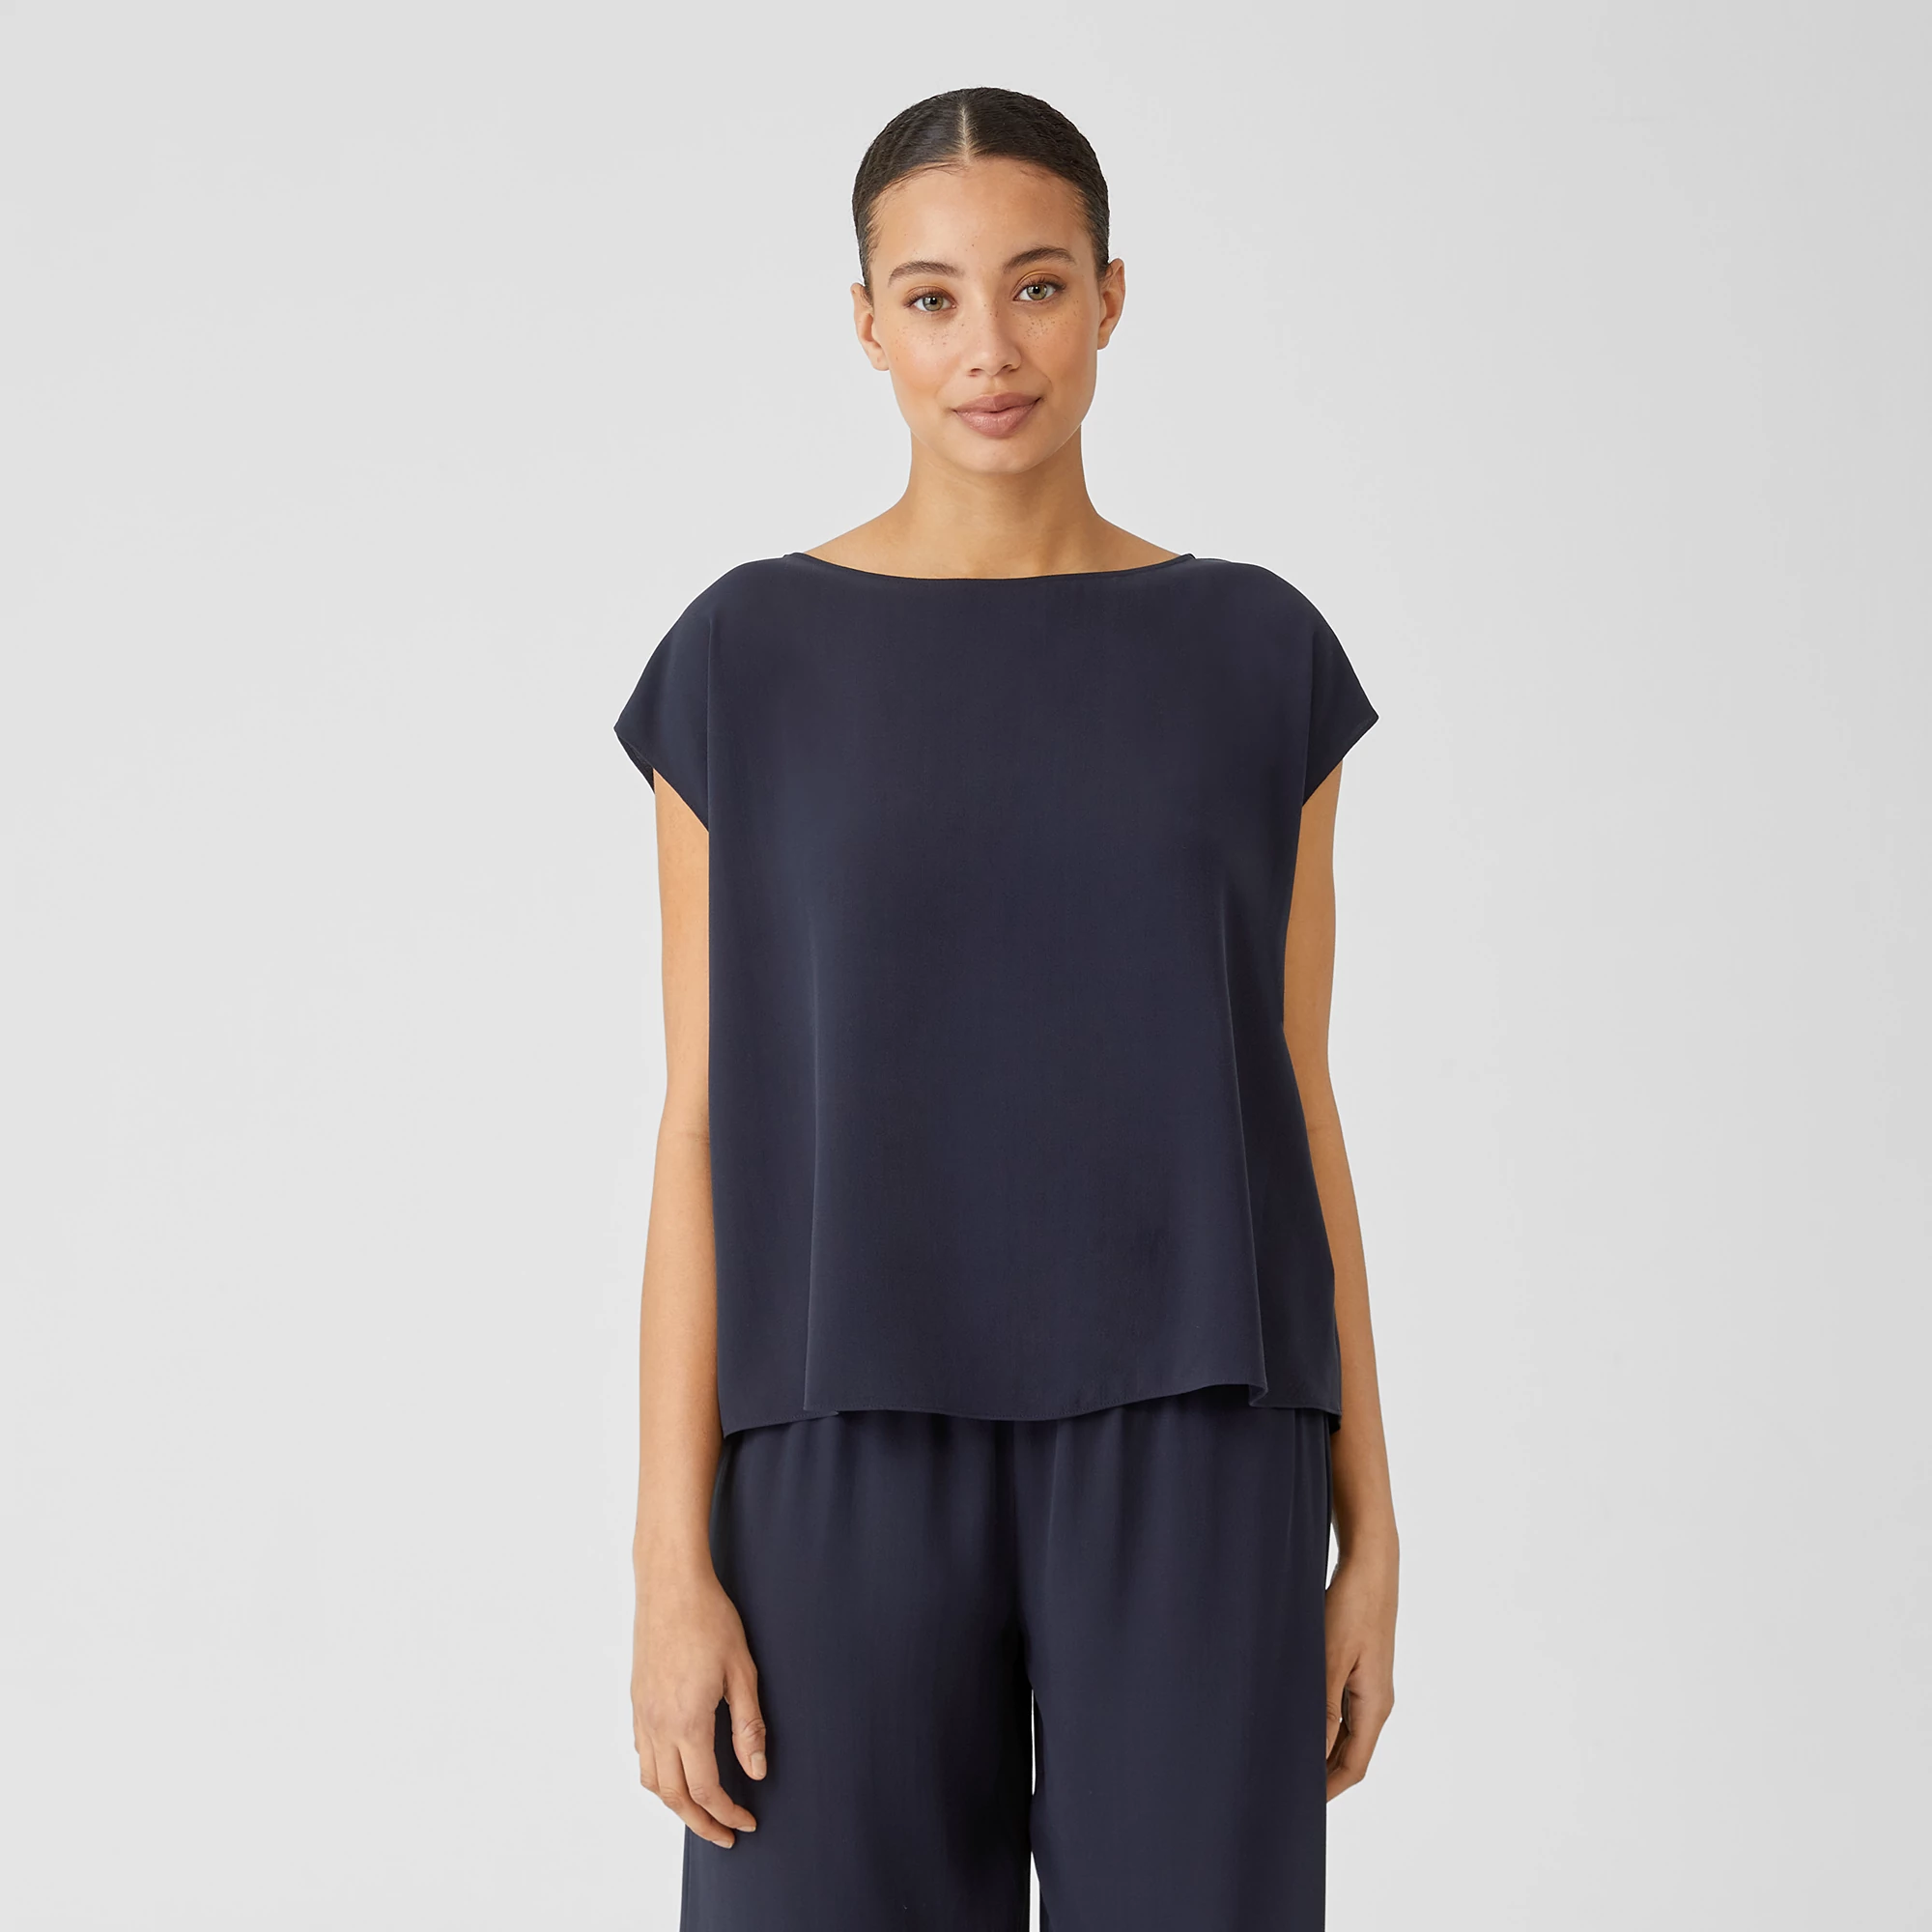 NWT Eileen Fisher SYSTEM Midnight/Navy Blue Silk Crepe Long Tunic Shell $218 S 